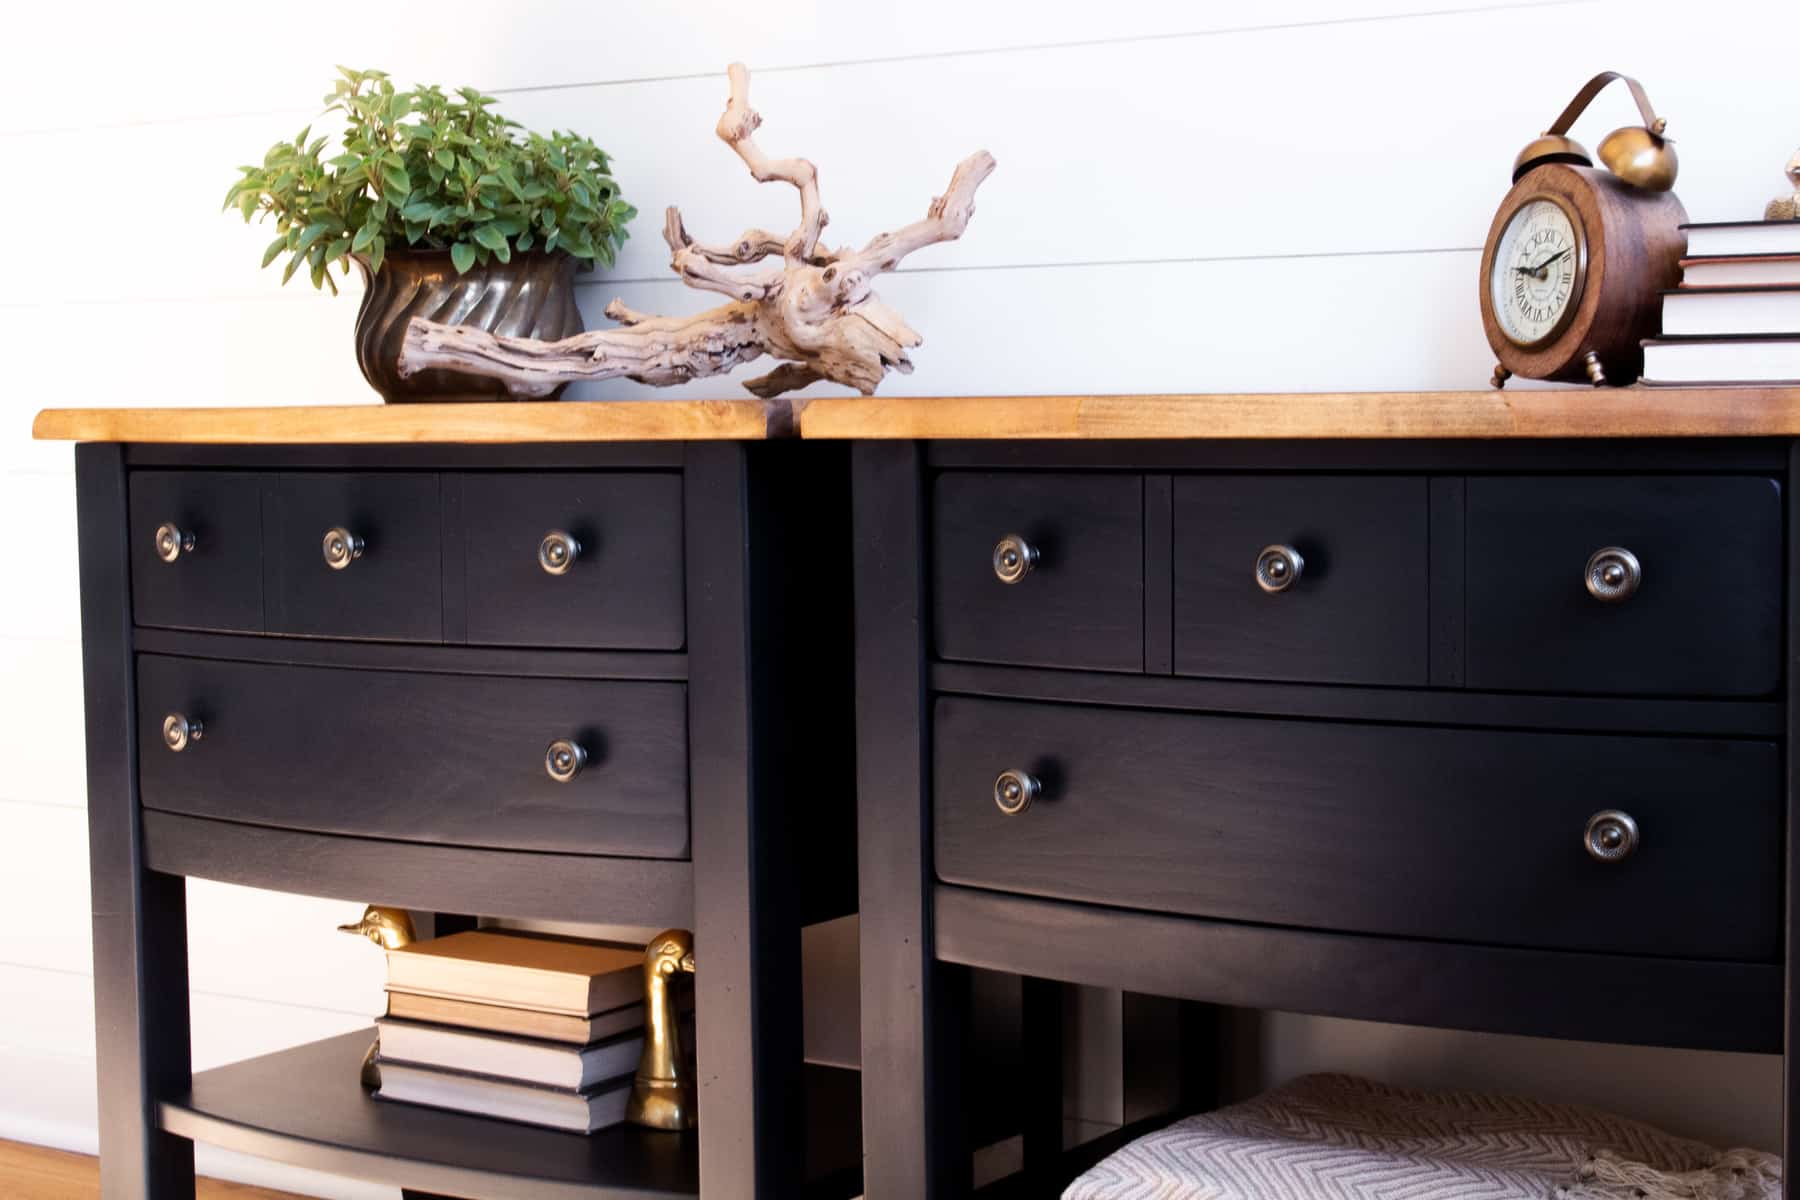 Sophisticated black end tables - painted with eco-friendly DIY furniture paint from Country Chic Paint